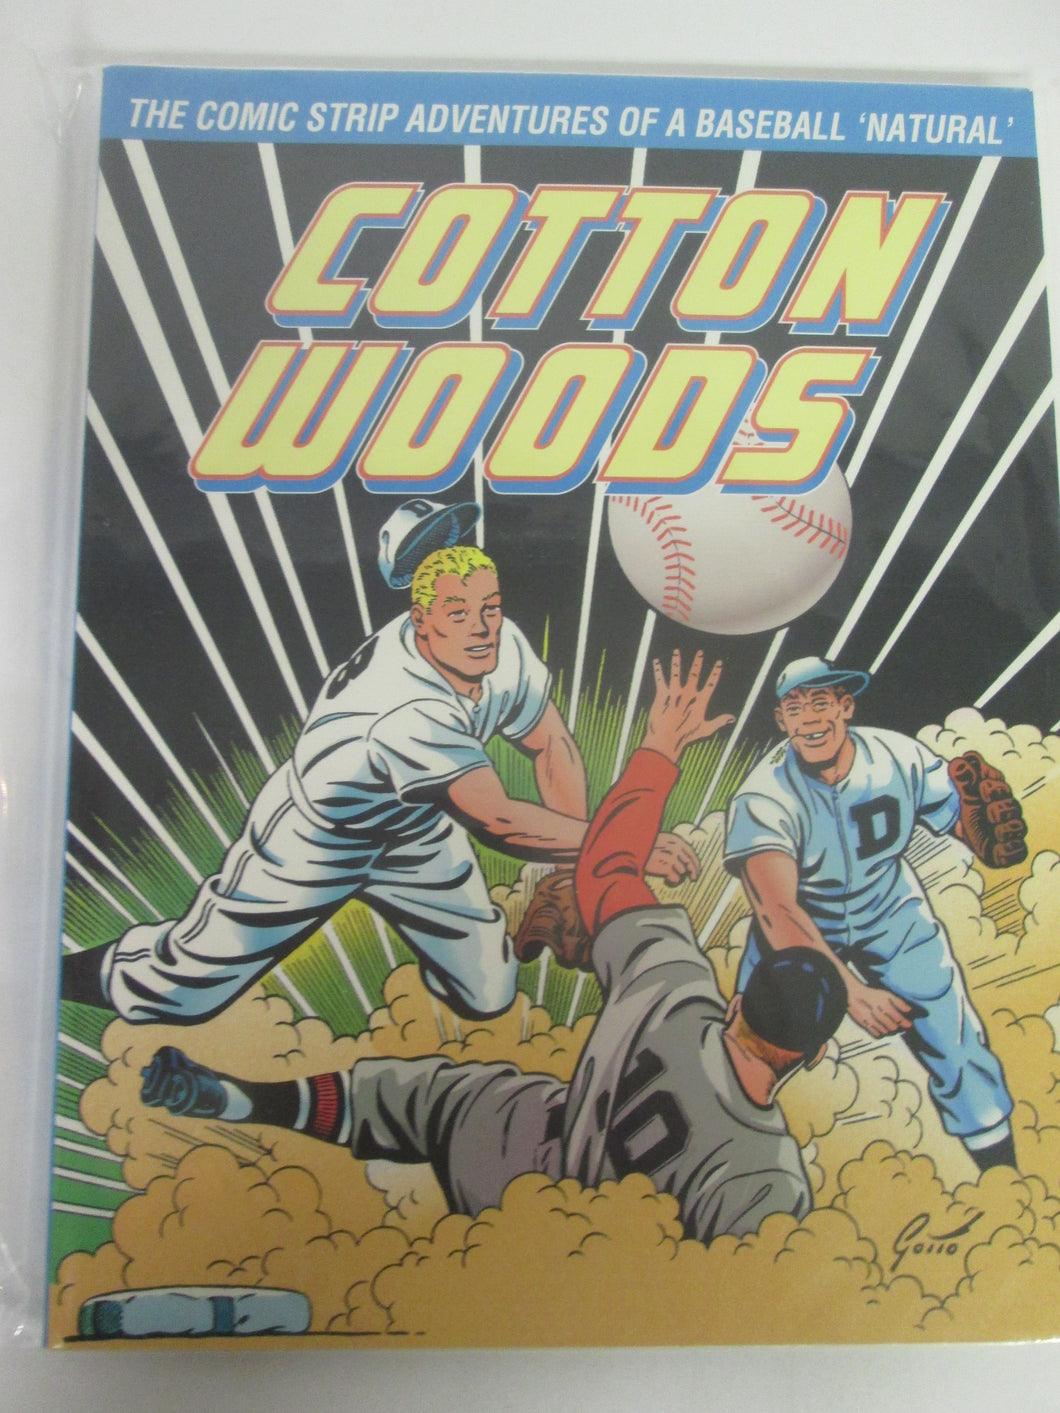 Cotton Woods Comic Strip Adventures of a Baseball 'Natural' by Ray Gotto PB